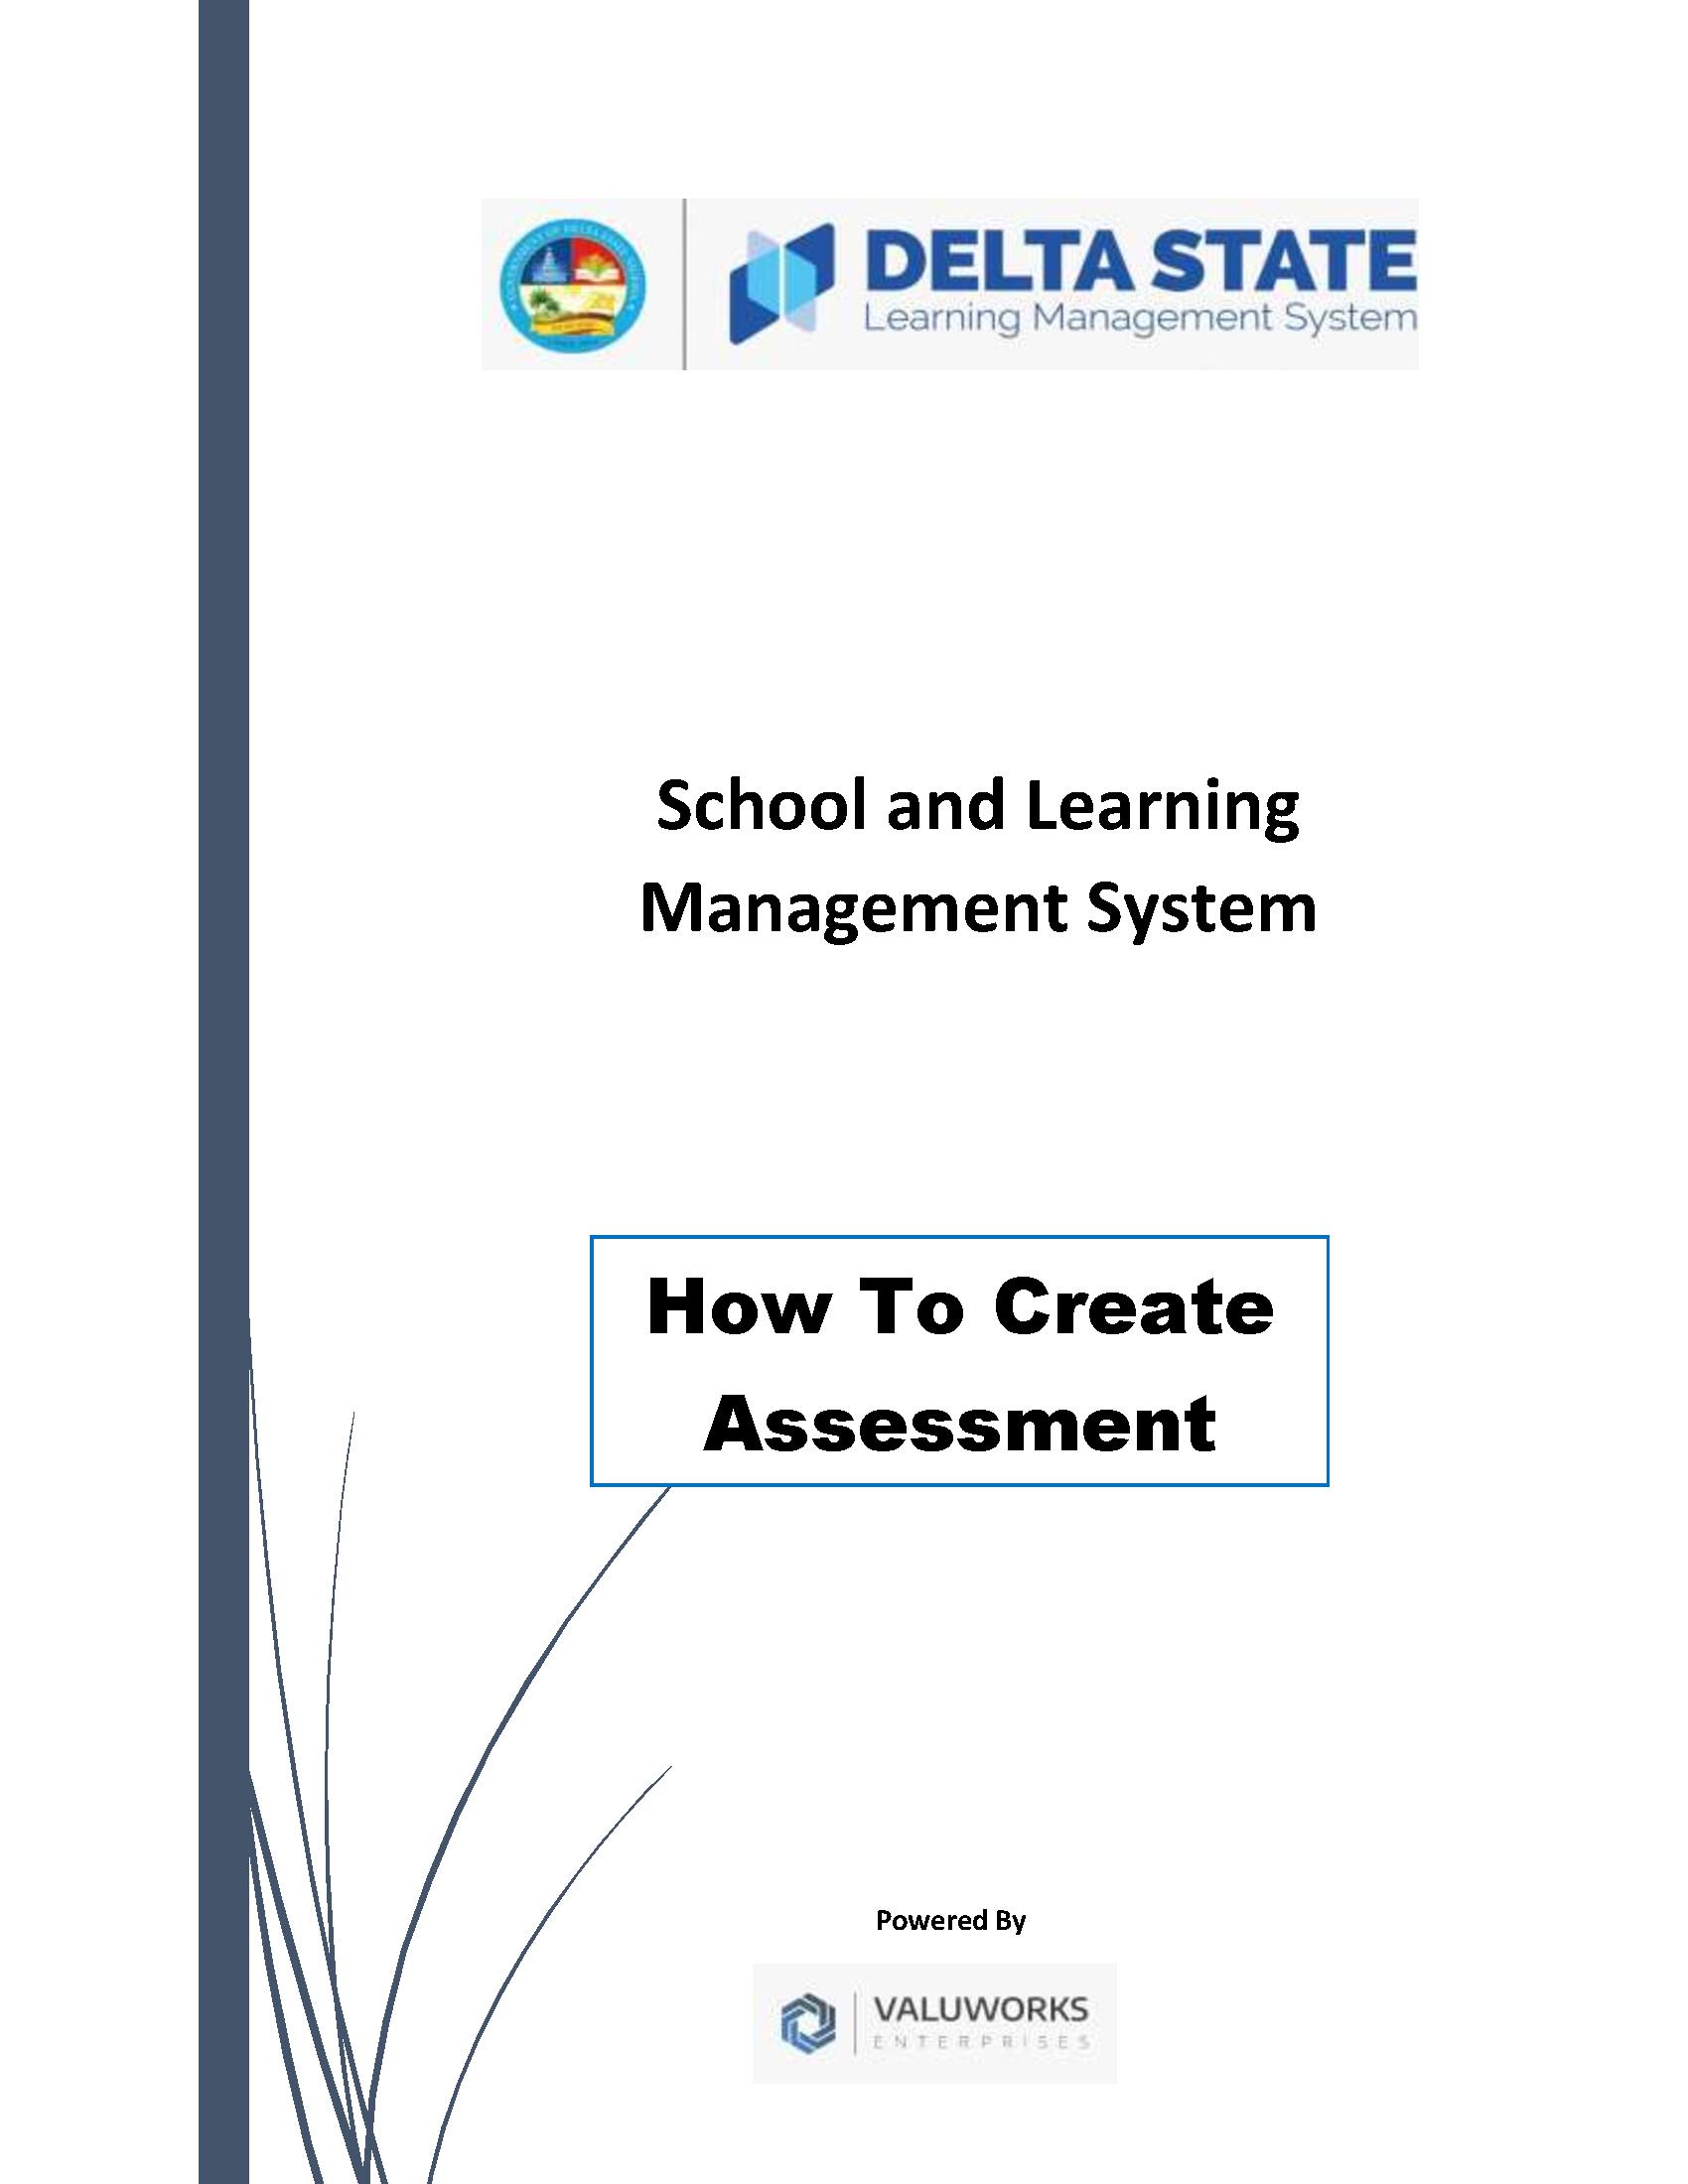 How to create assessment on the DSLMS jpg